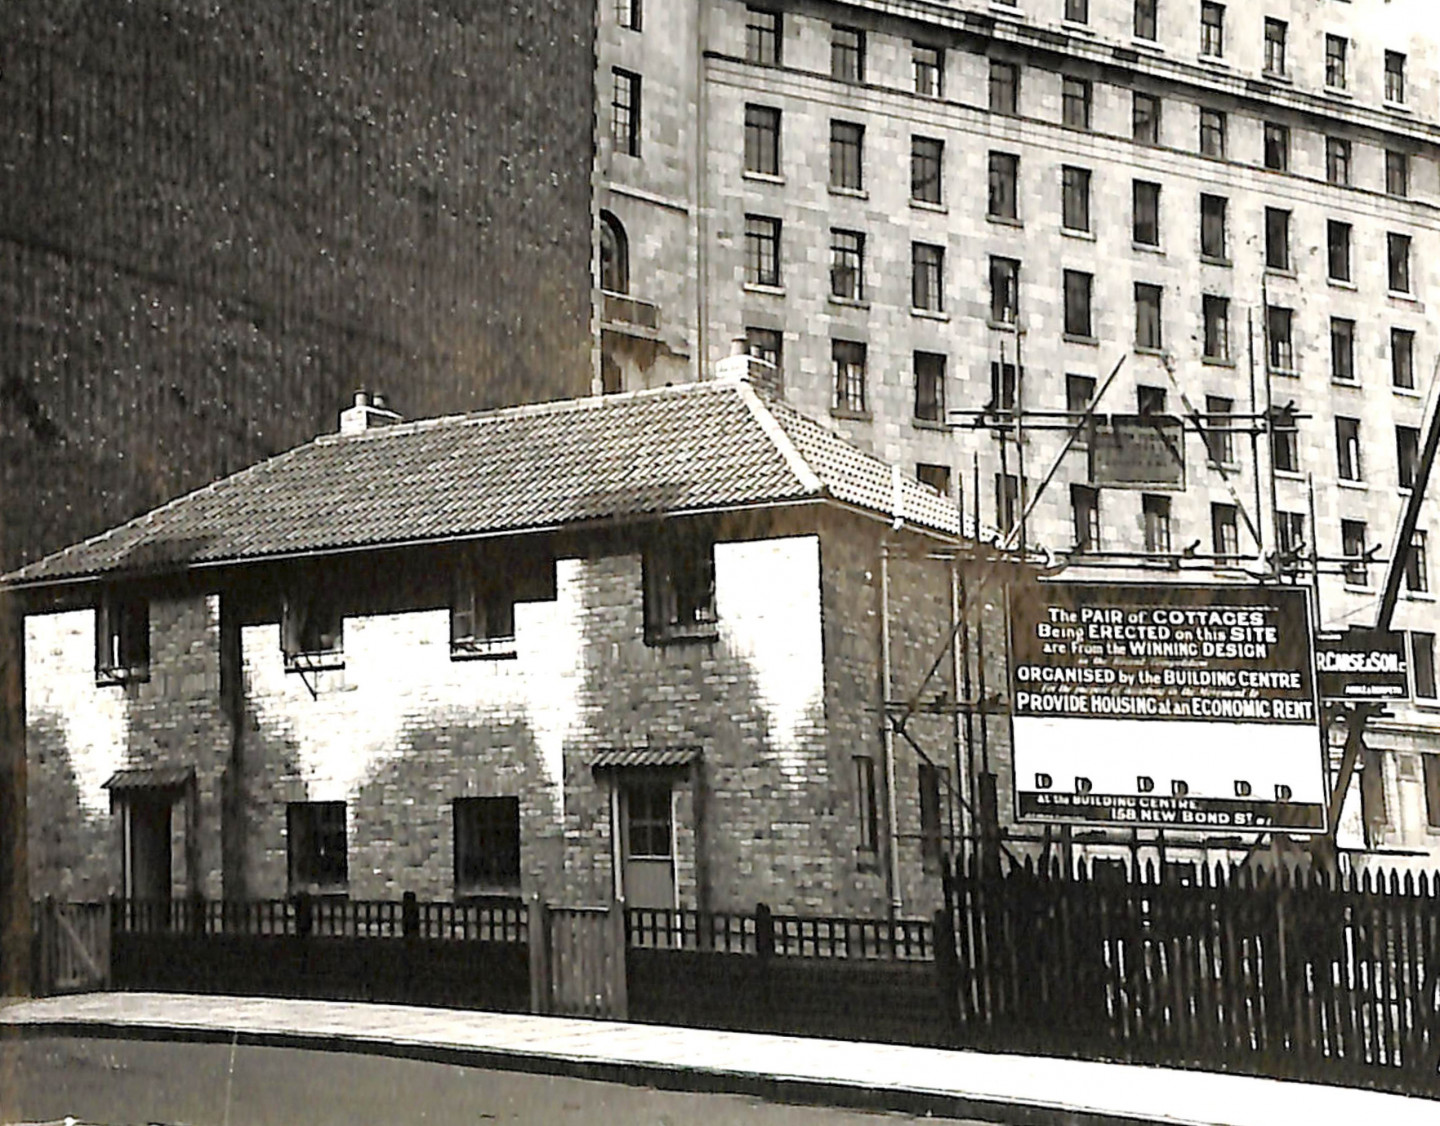 1933 – Seminal low-cost housing exhibition of three-bedroom cottages, Aldwych © Building Centre